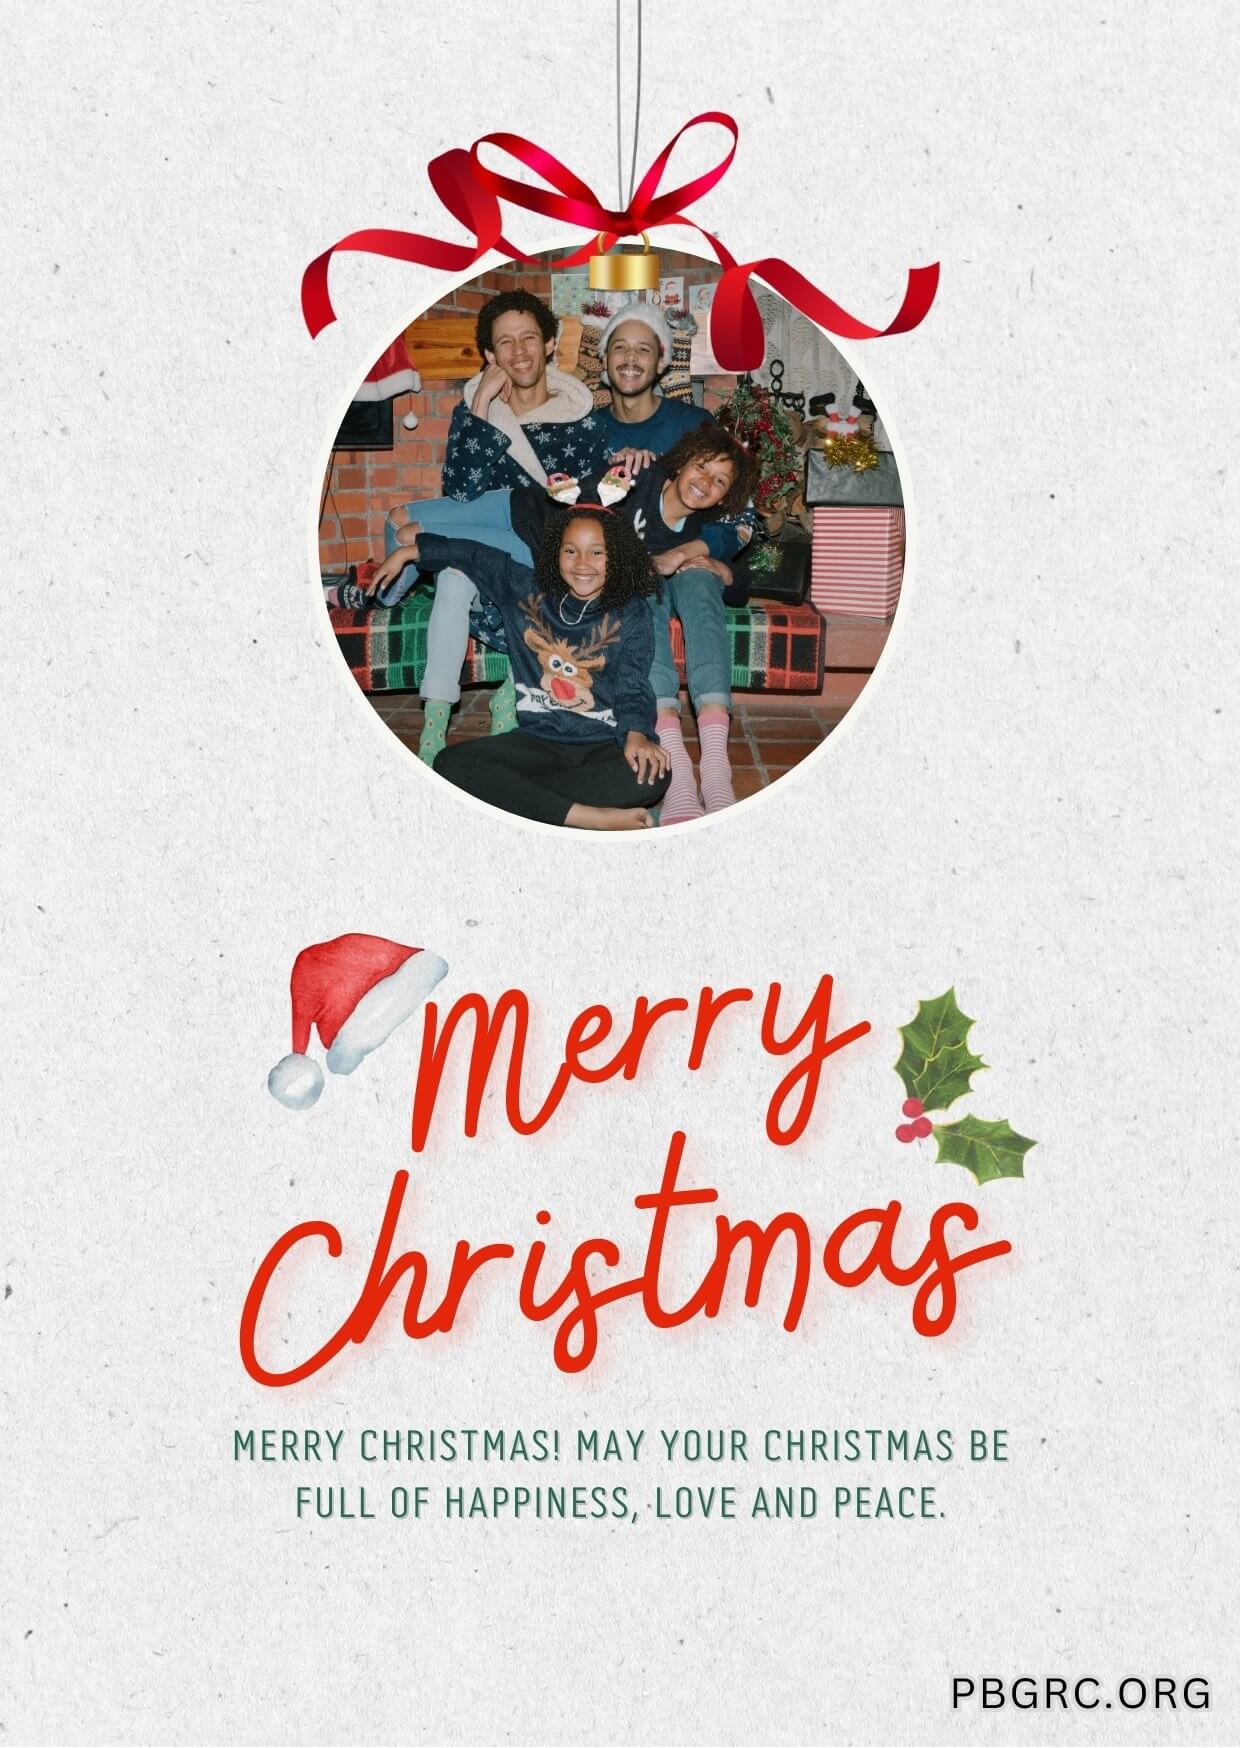 merry christmas greeting messages